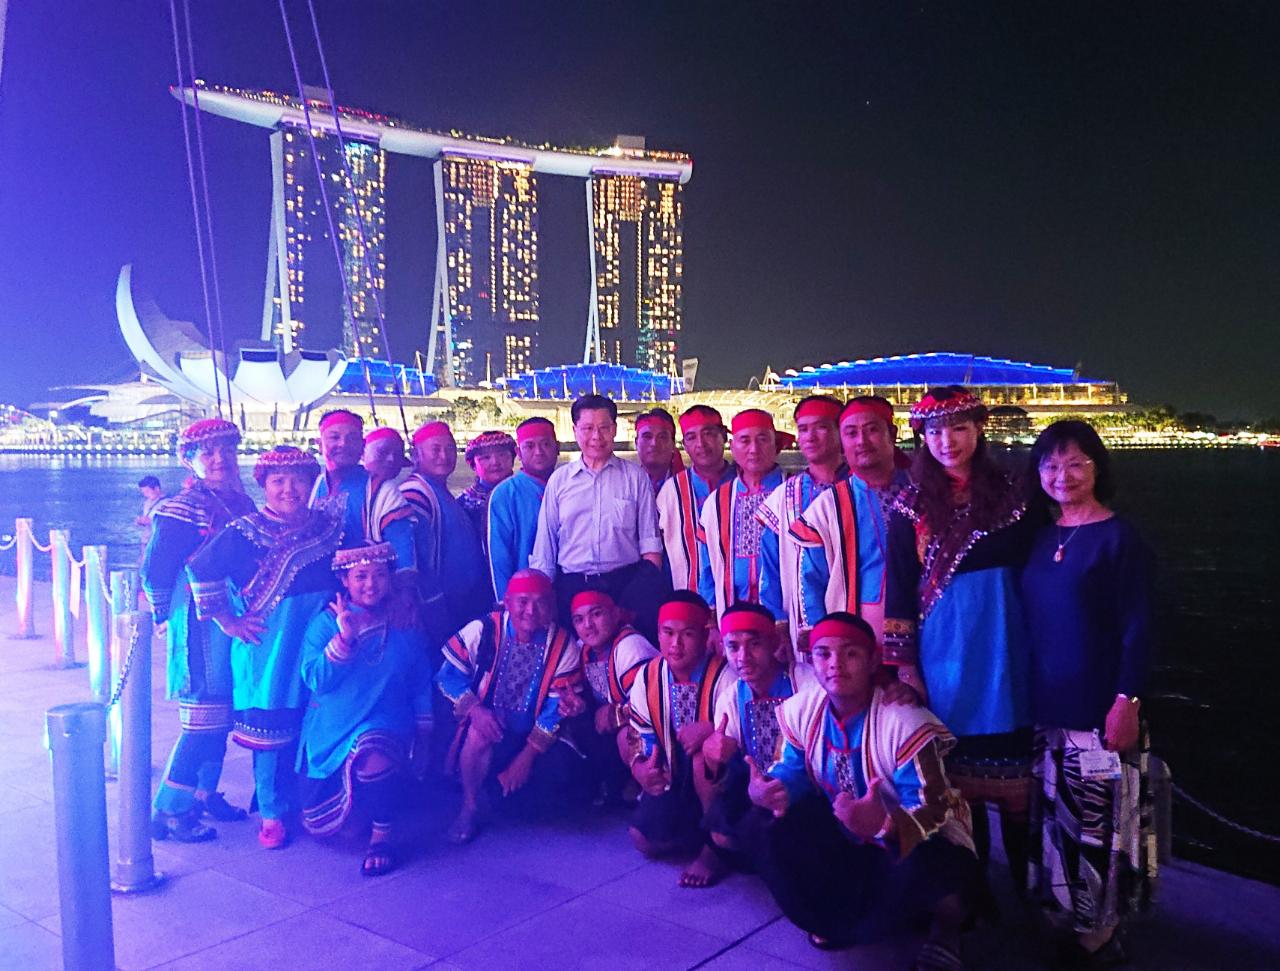 Group photo of Representative Francis Kuo-Hsin Liang (center, second row) with the members of the Bunun Mountain Traditional Music Chorus, cellist Annie Chang (second row, second from right), and producer Alice Chang (second row, extreme right).(2019/04/21)